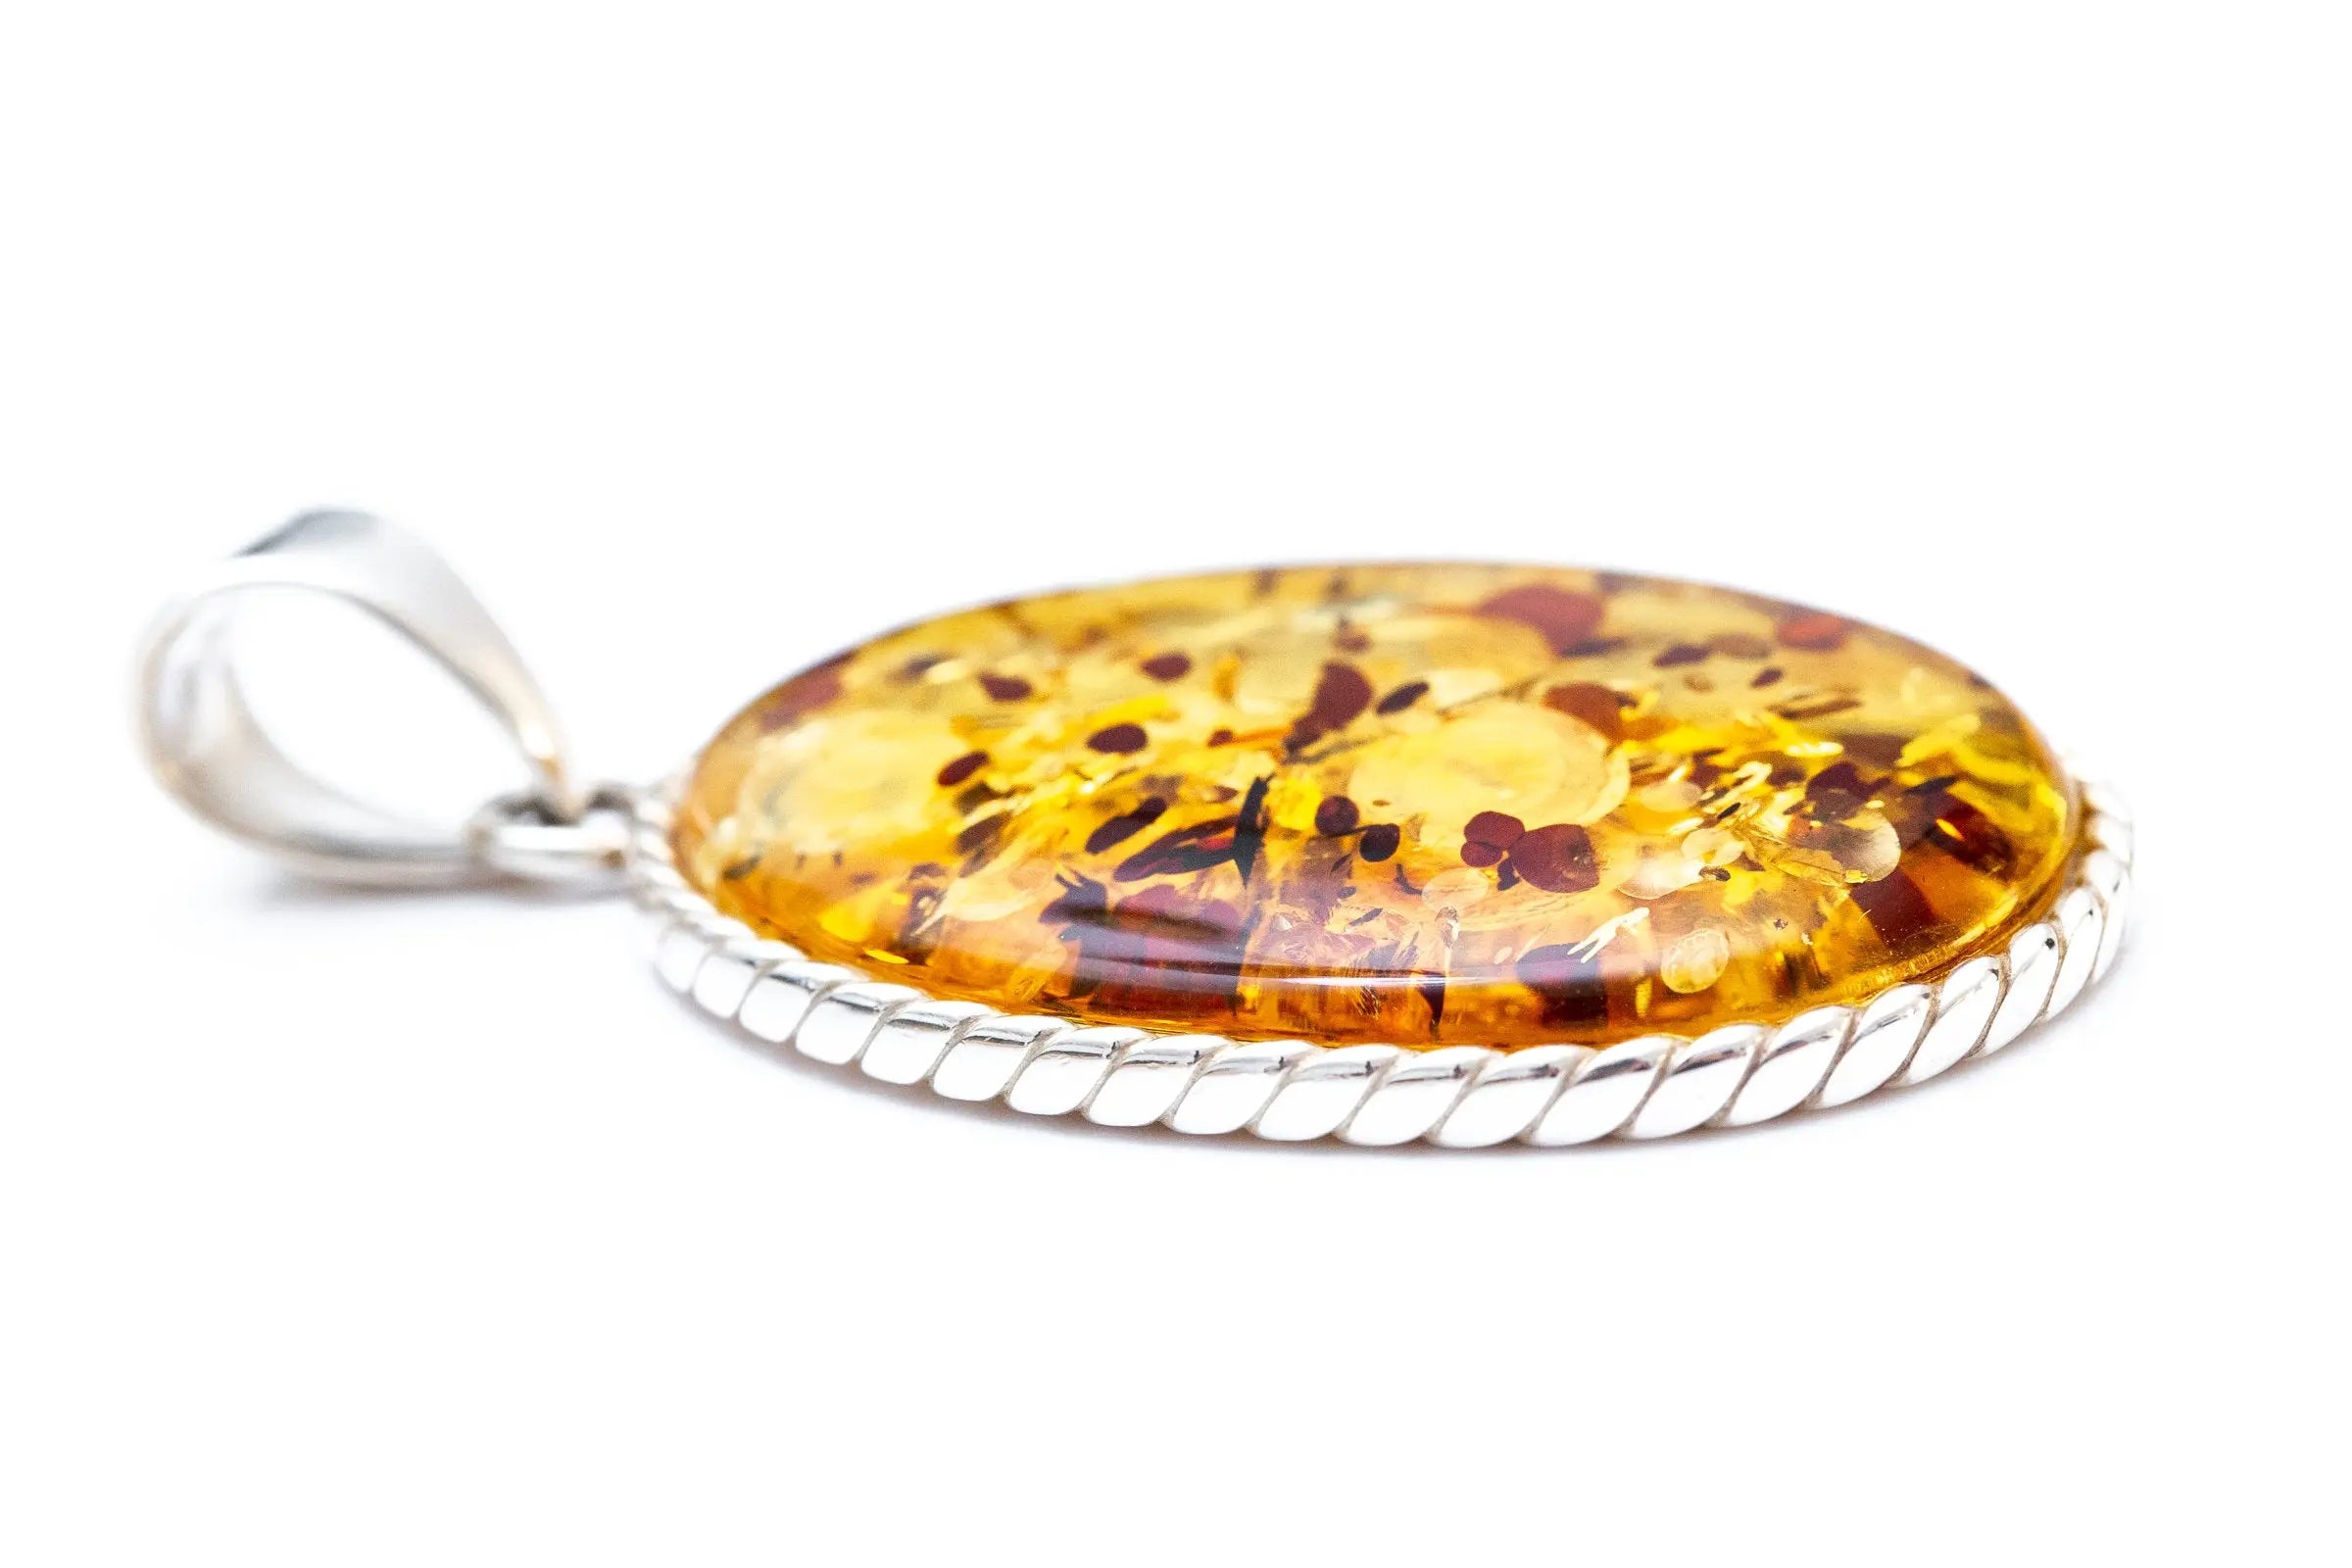 Handmade Speckled Honey Amber Braid Pendant- Necklaces- Baltic Beauty